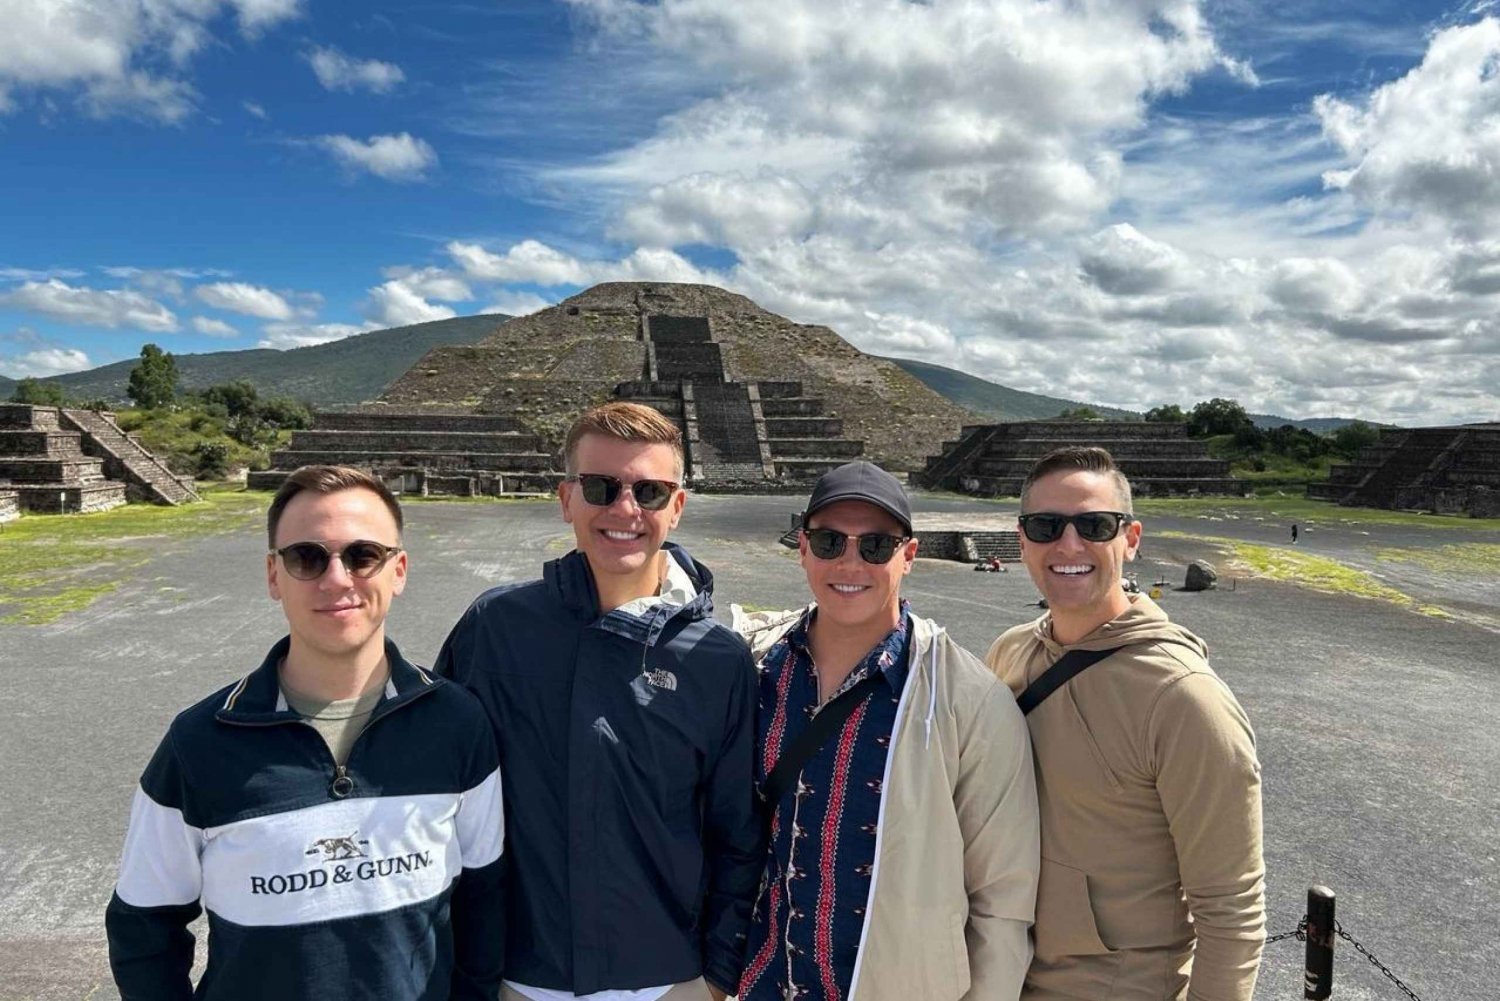 Teotihuacan Pyramids Private Tour